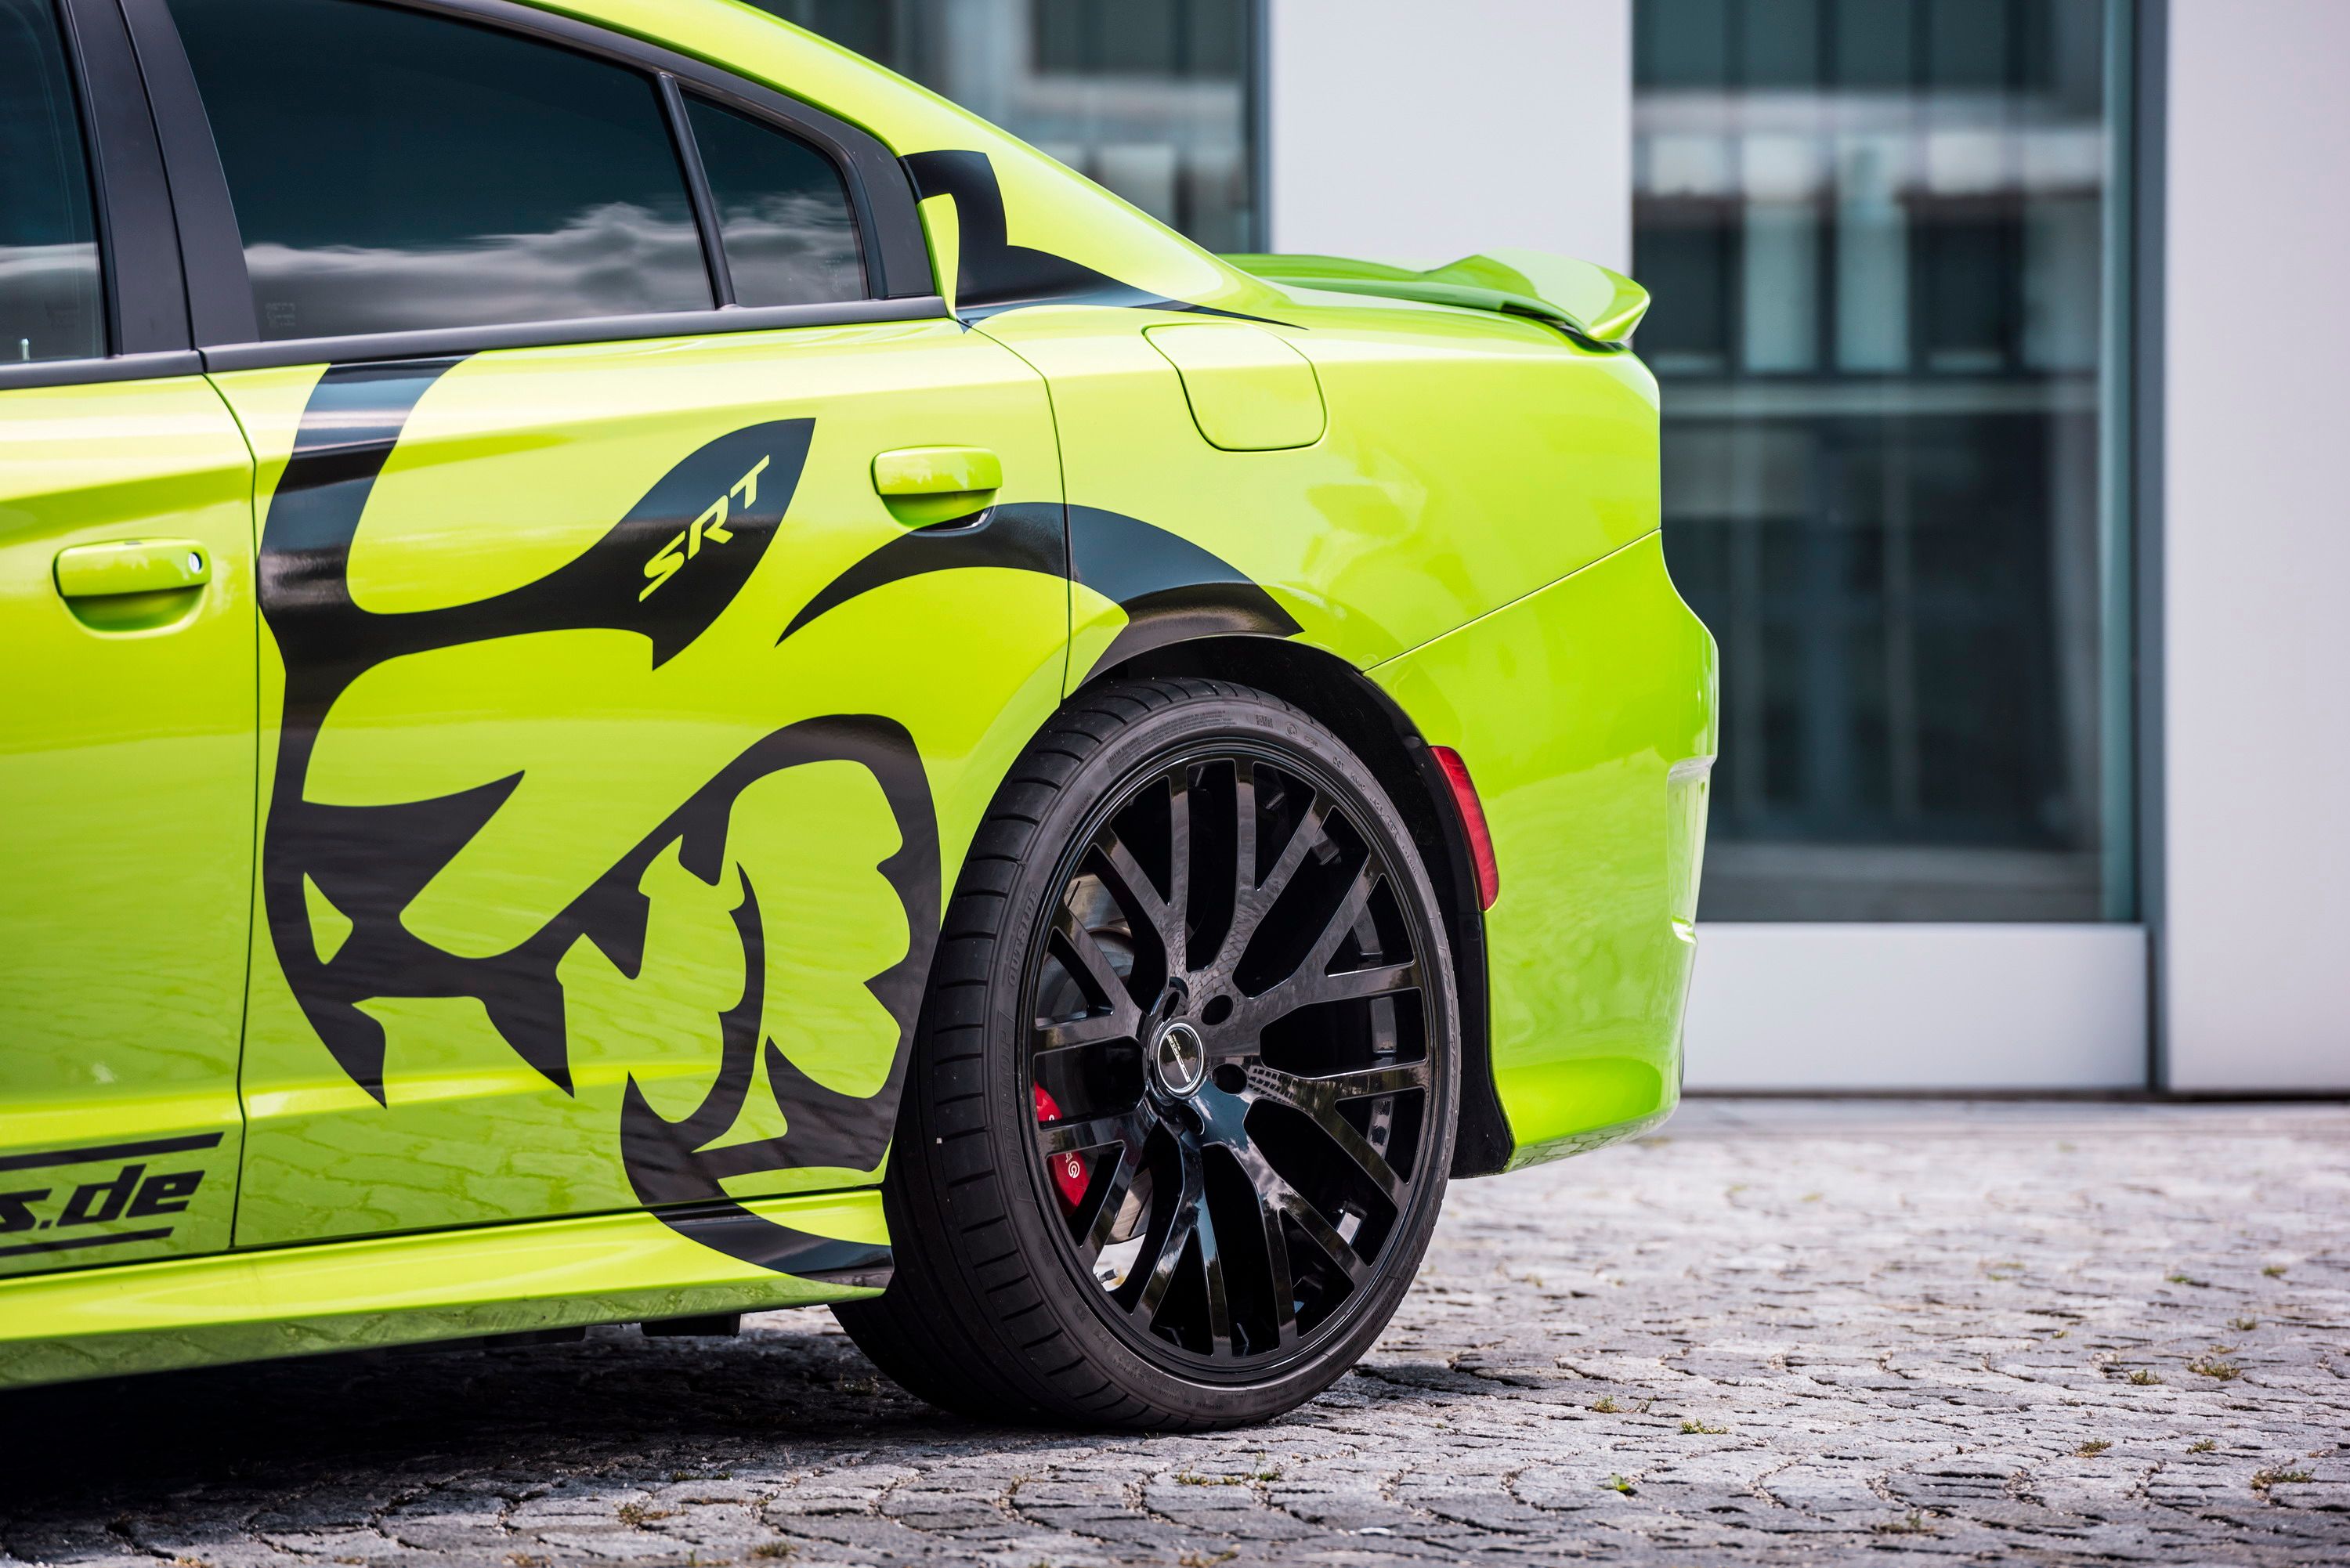 2016 Dodge Charger SRT Hellcat by Geiger Cars